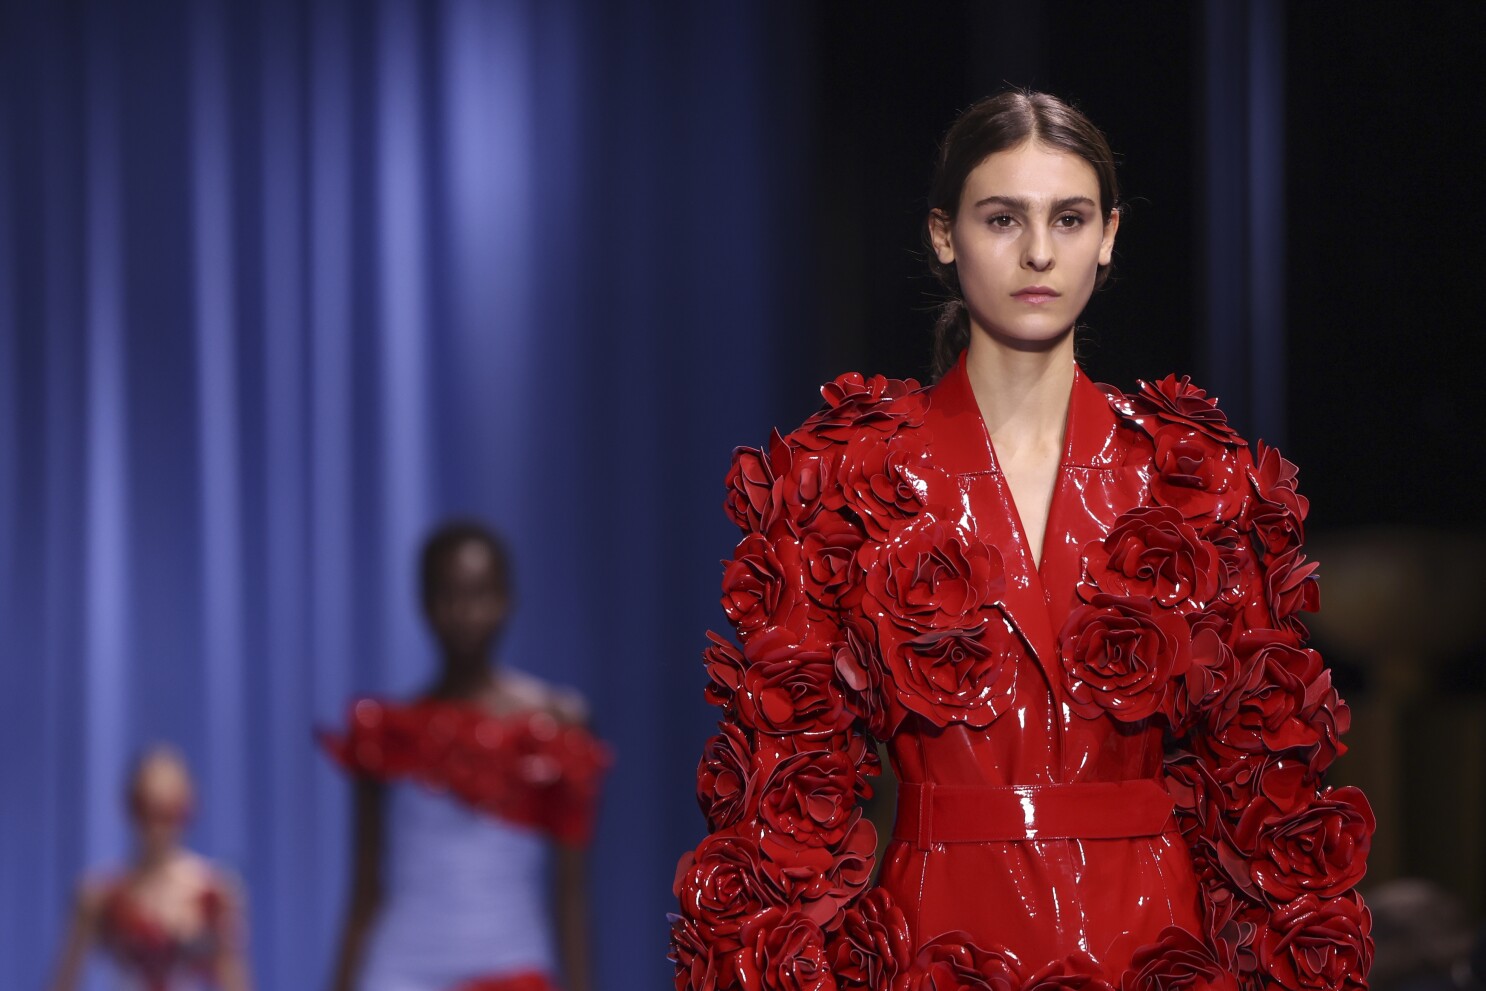 Following theft, Balmain shows defiance with flowers in rose